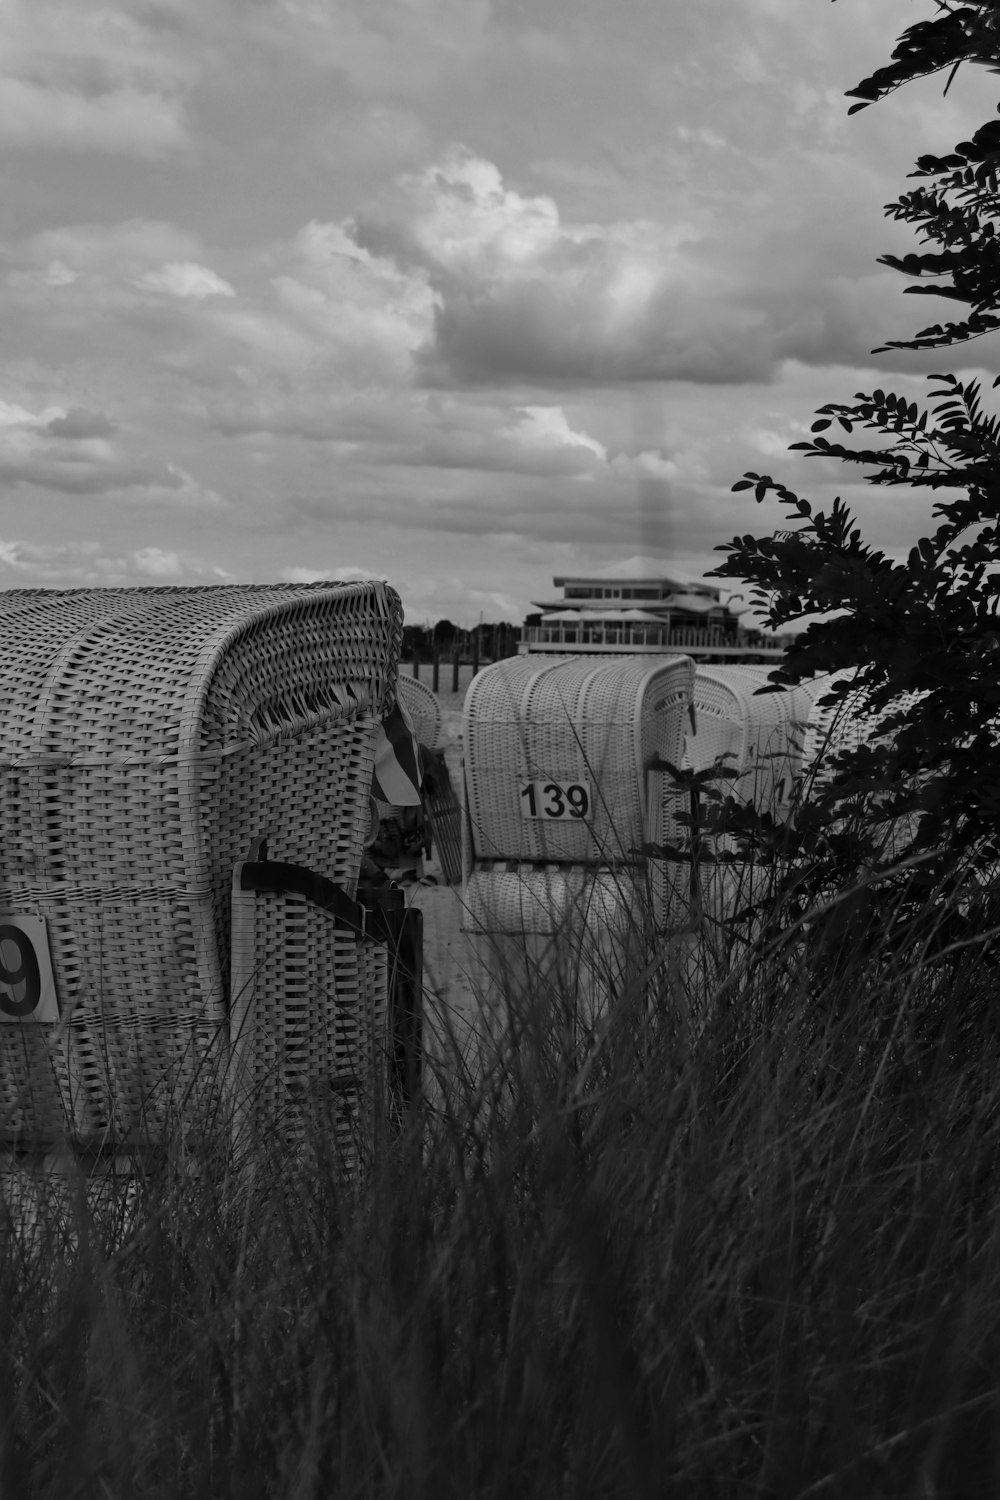 a black and white photo of some baskets